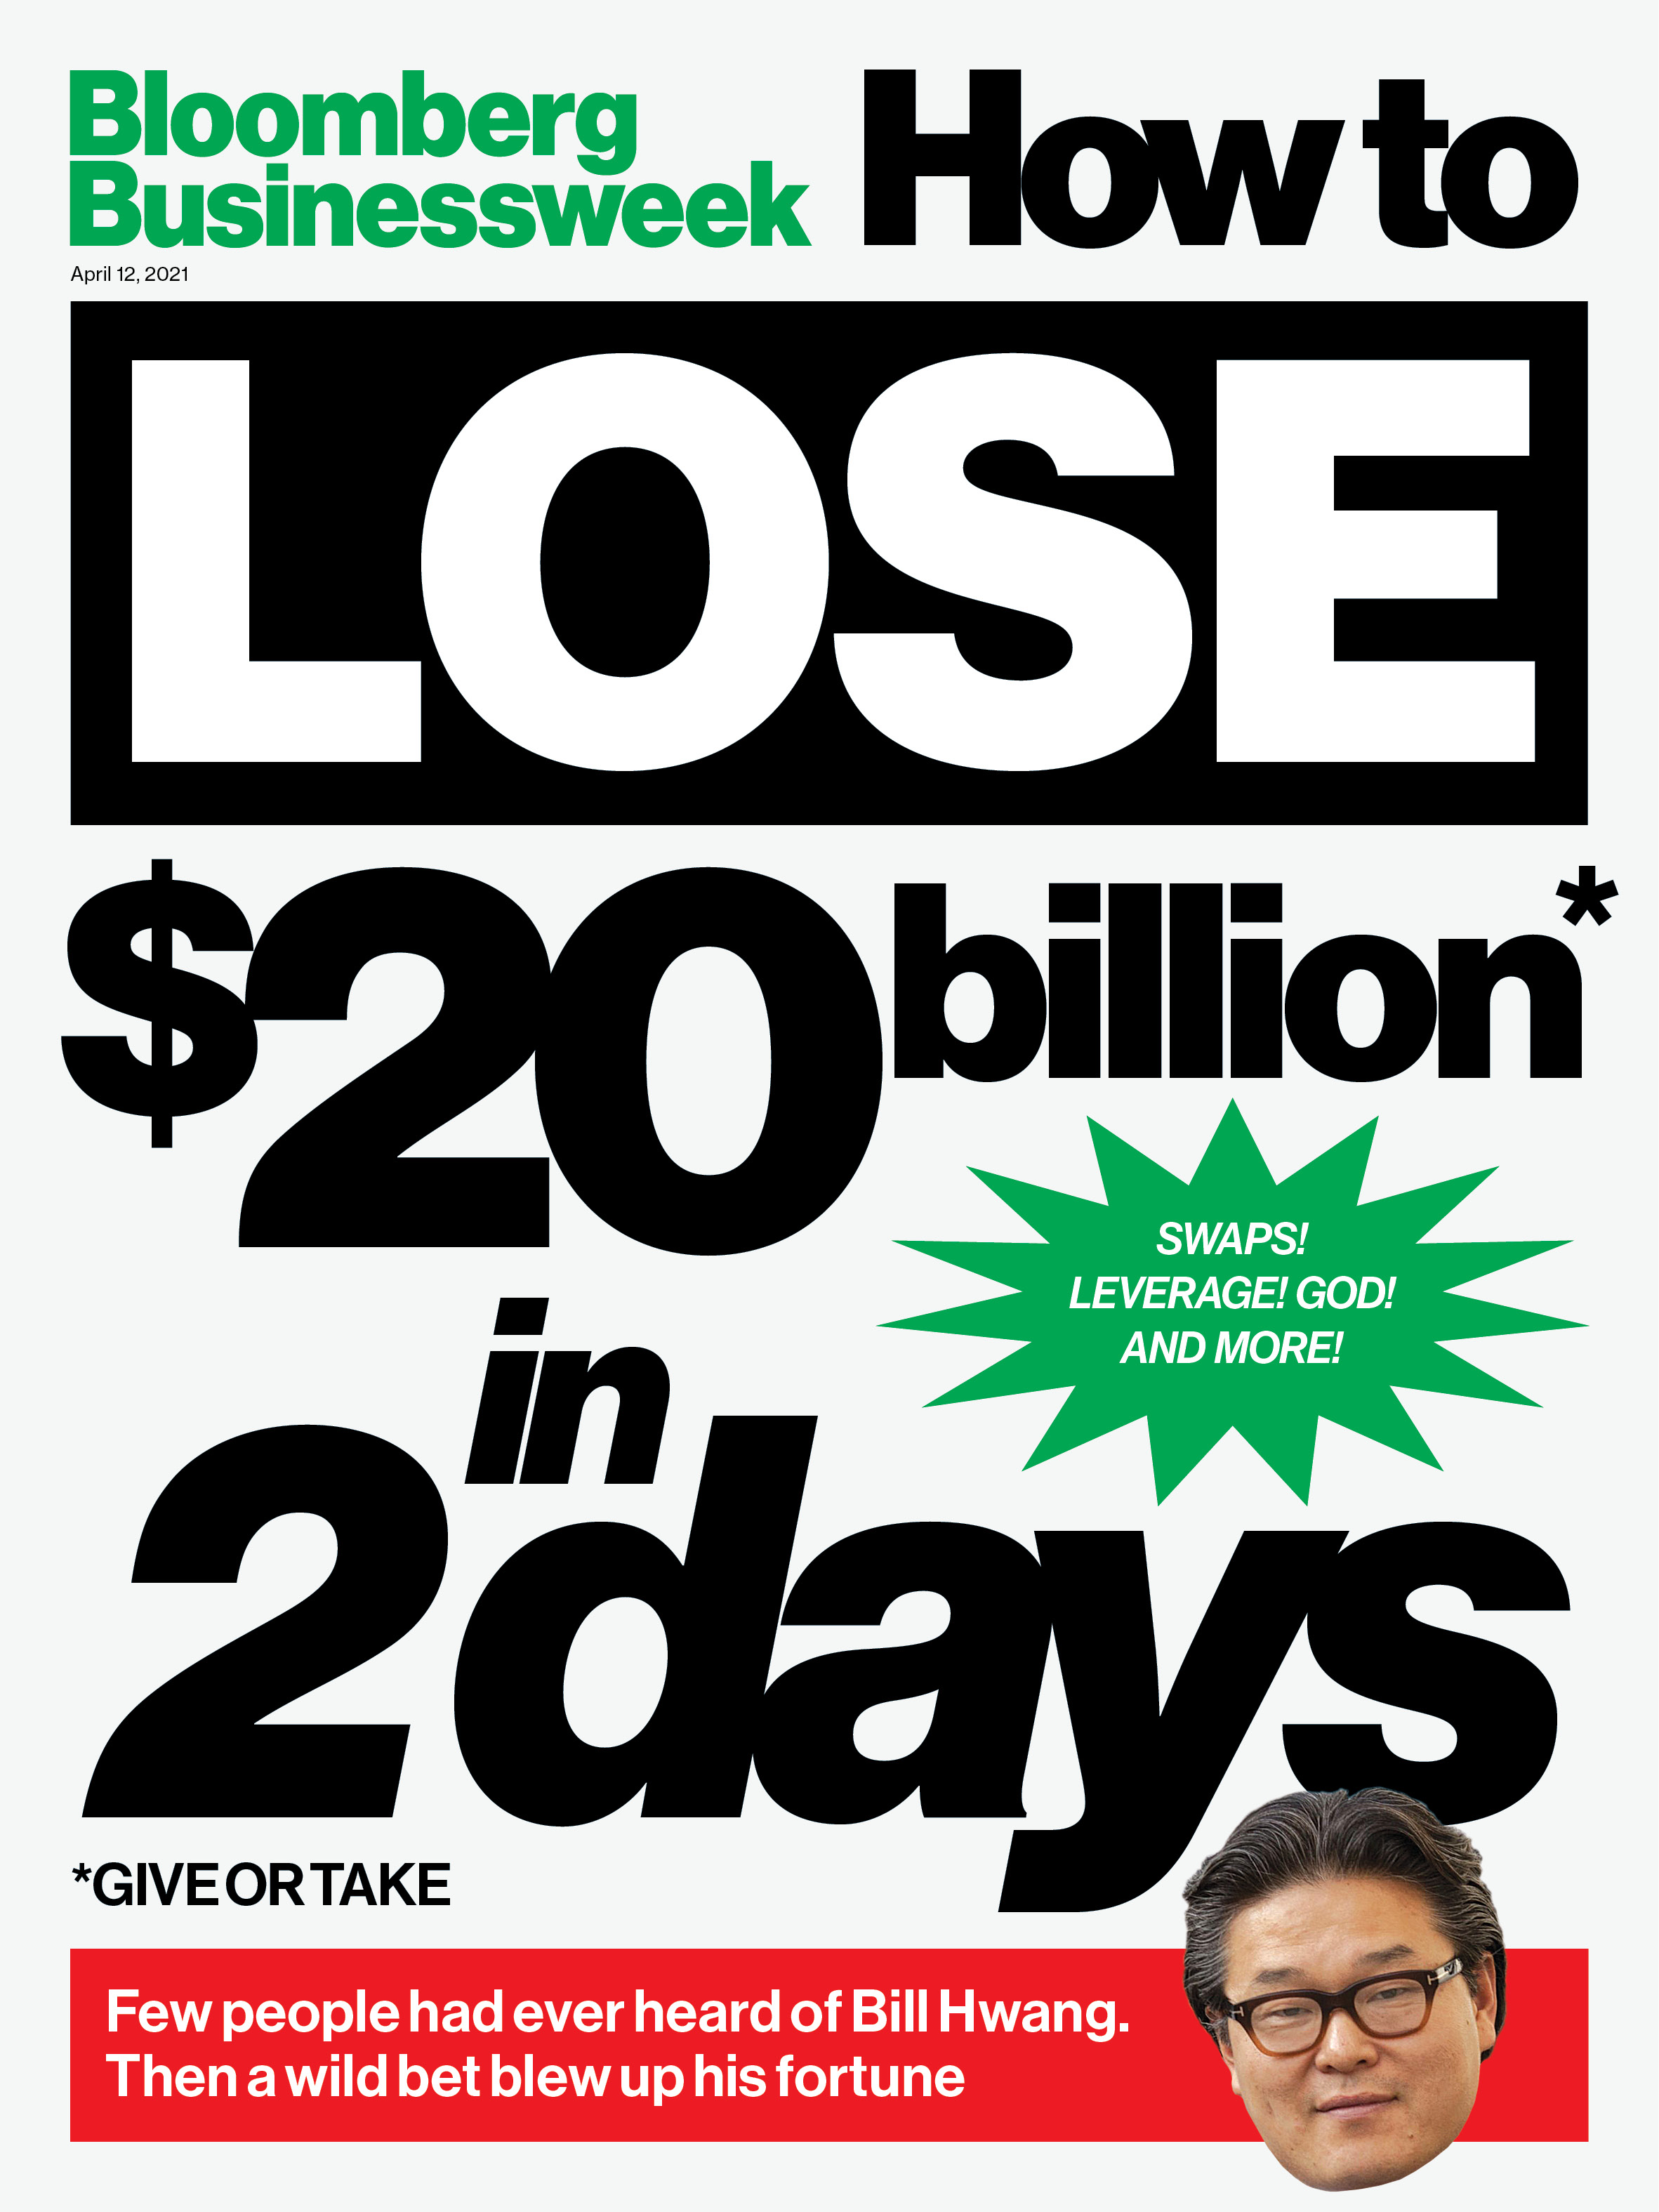 Bloomberg Businessweek - "How to Lose $20 Billion* in 2 Days," April 12, 2021